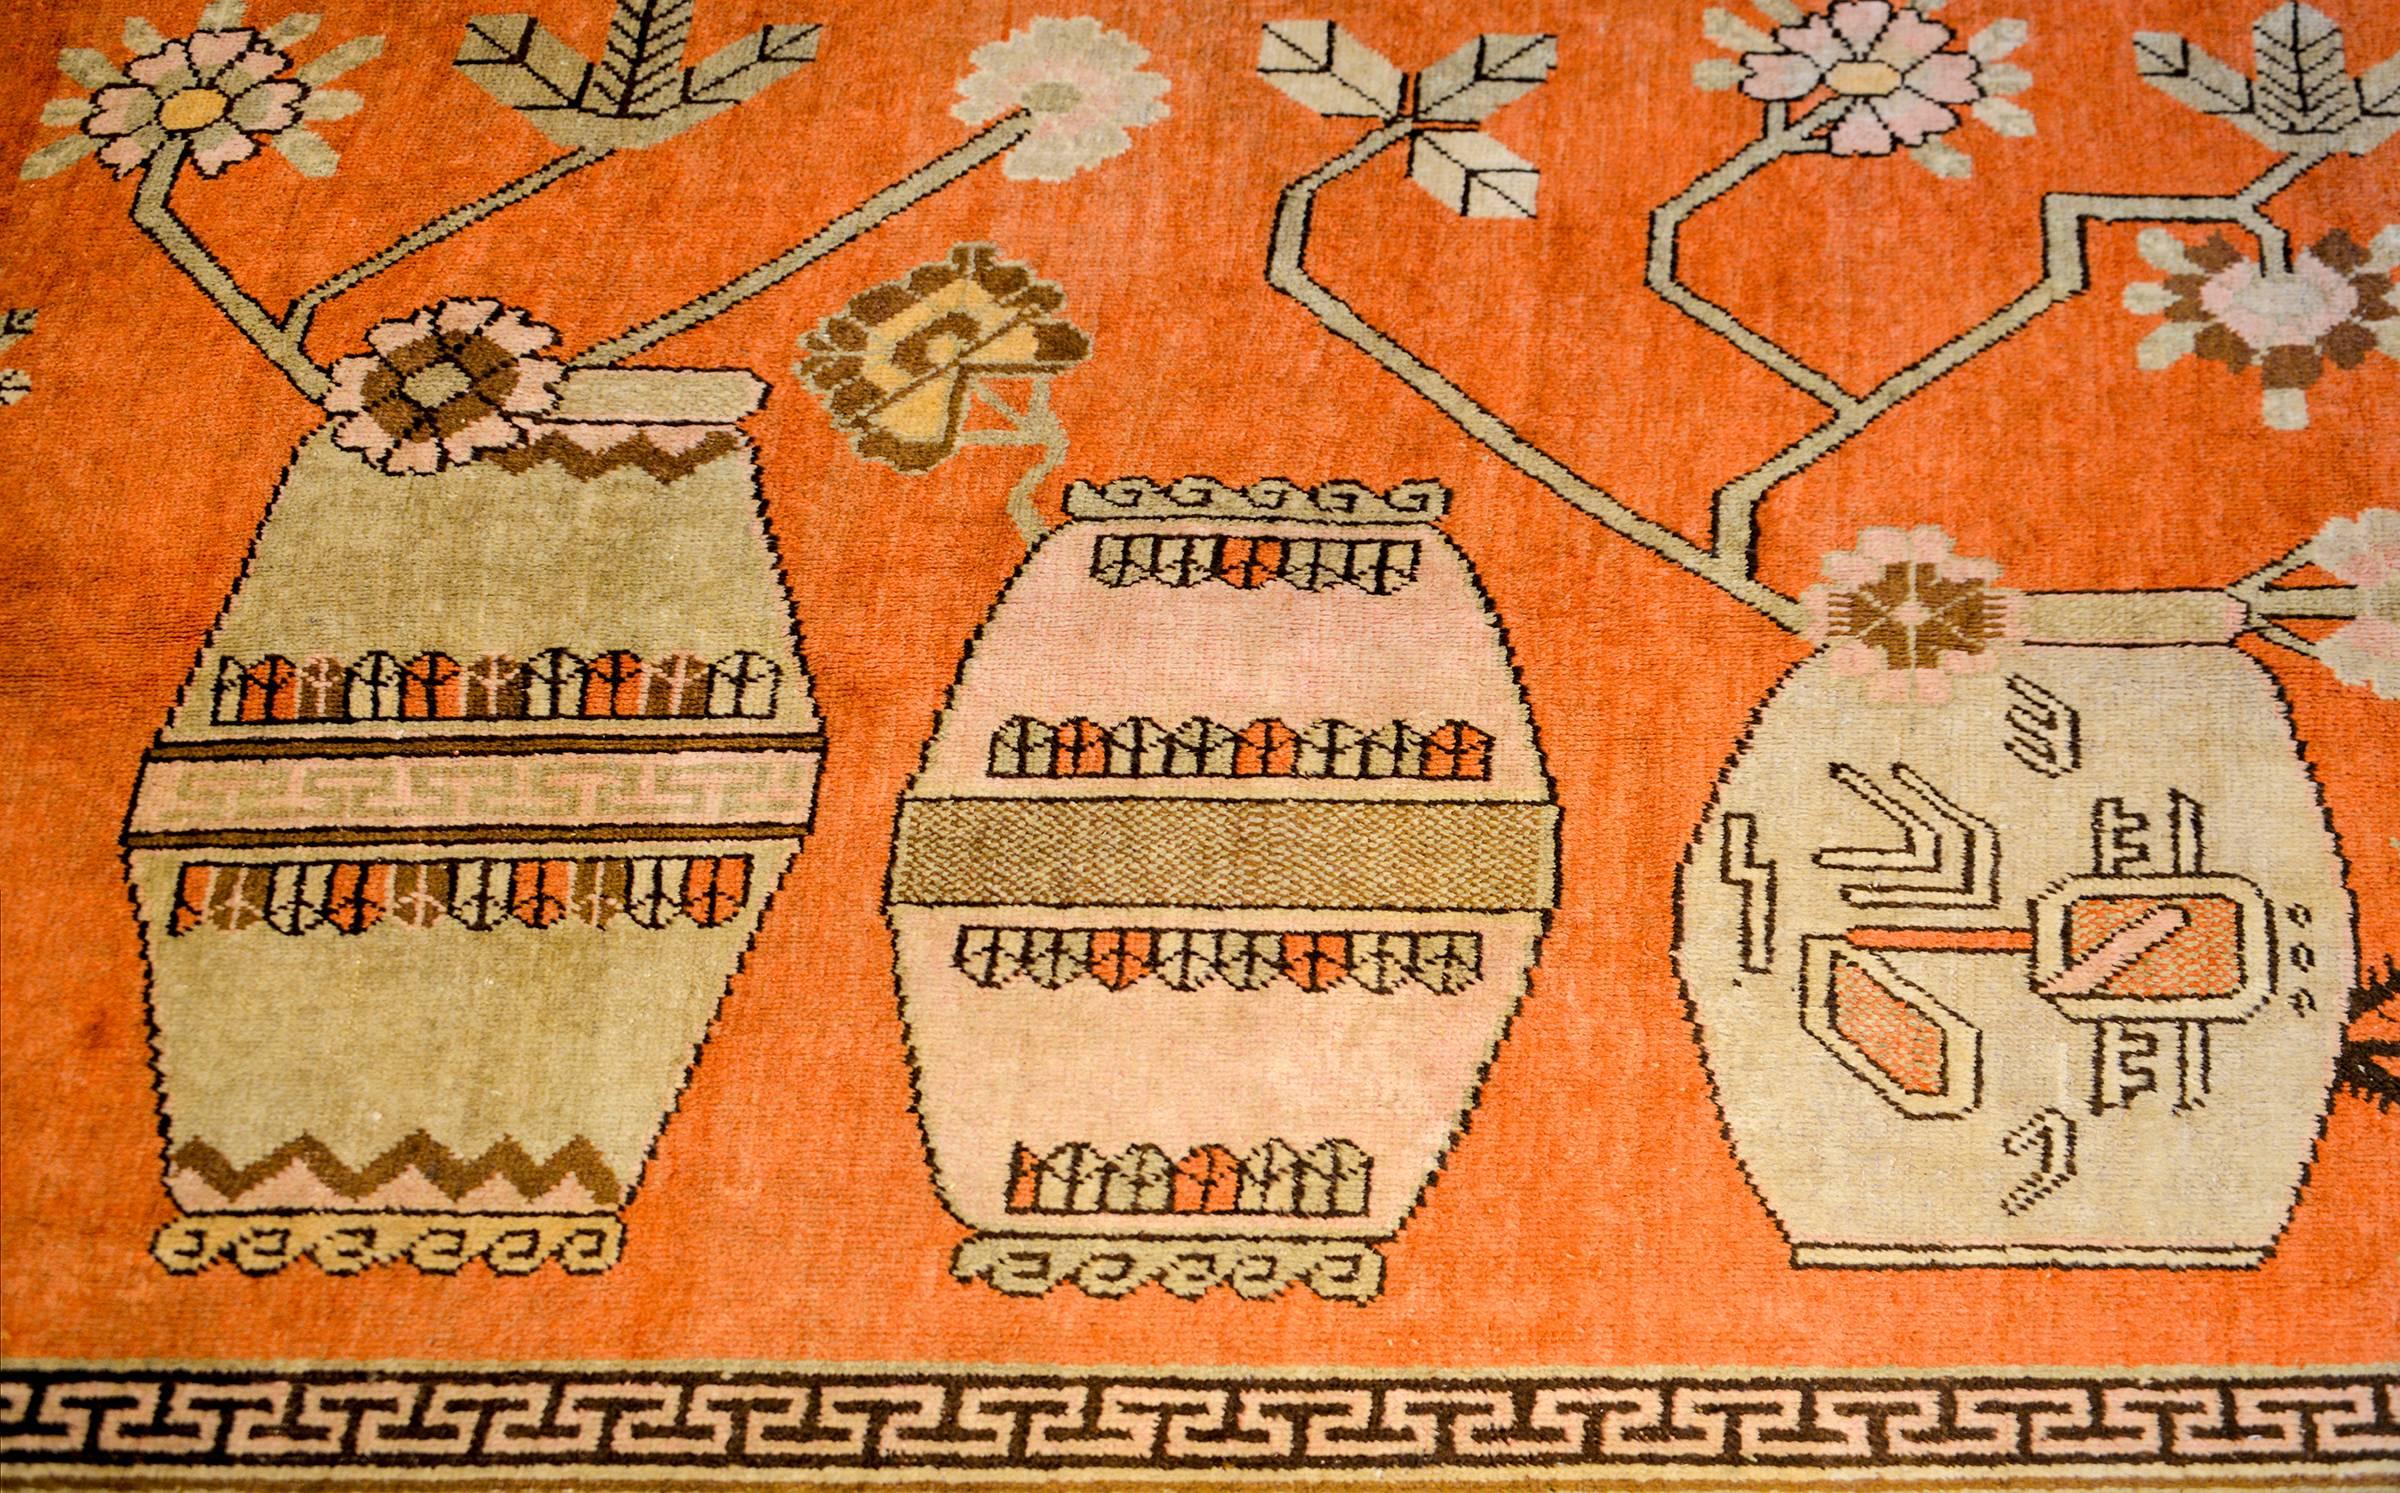 A wonderful early 20th century Central Asian pictorial Khotan rug with five large-scale Chinese-style vases potted with auspicious peony blossoms, and woven in multicolored vegetable dyed wool. The border is fantastic with a stylized large-scale